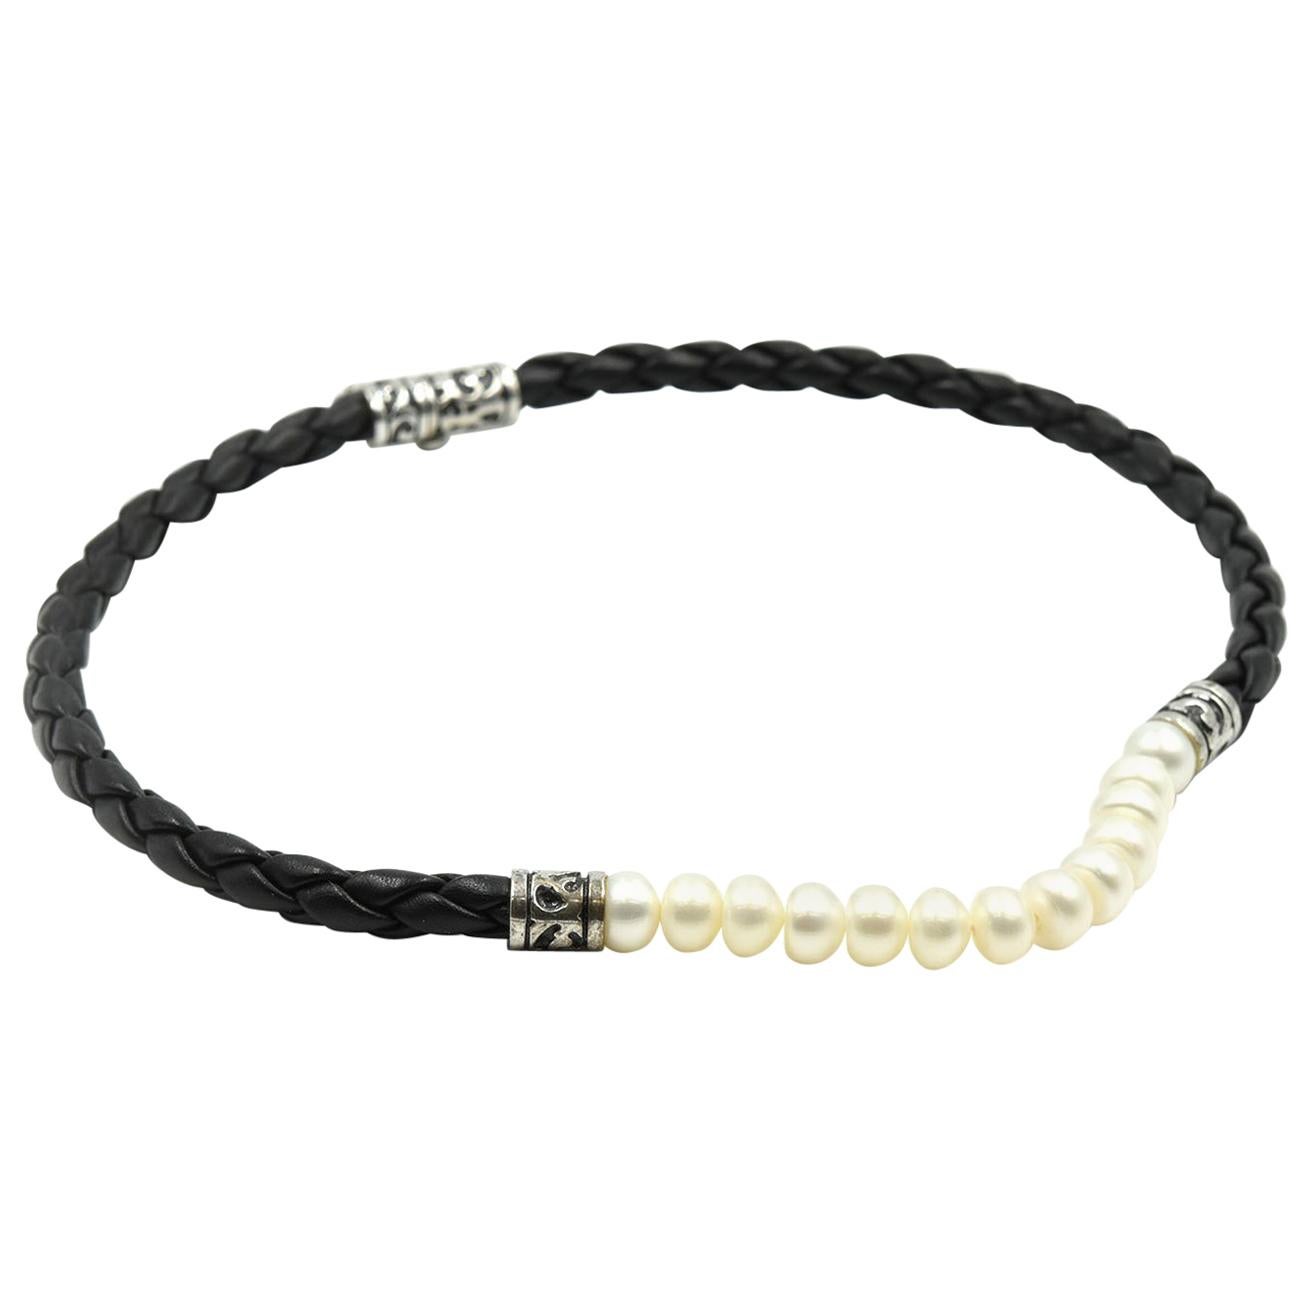 Freshwater Pearl Black Leather Braid Necklace with Sterling Silver Clasp